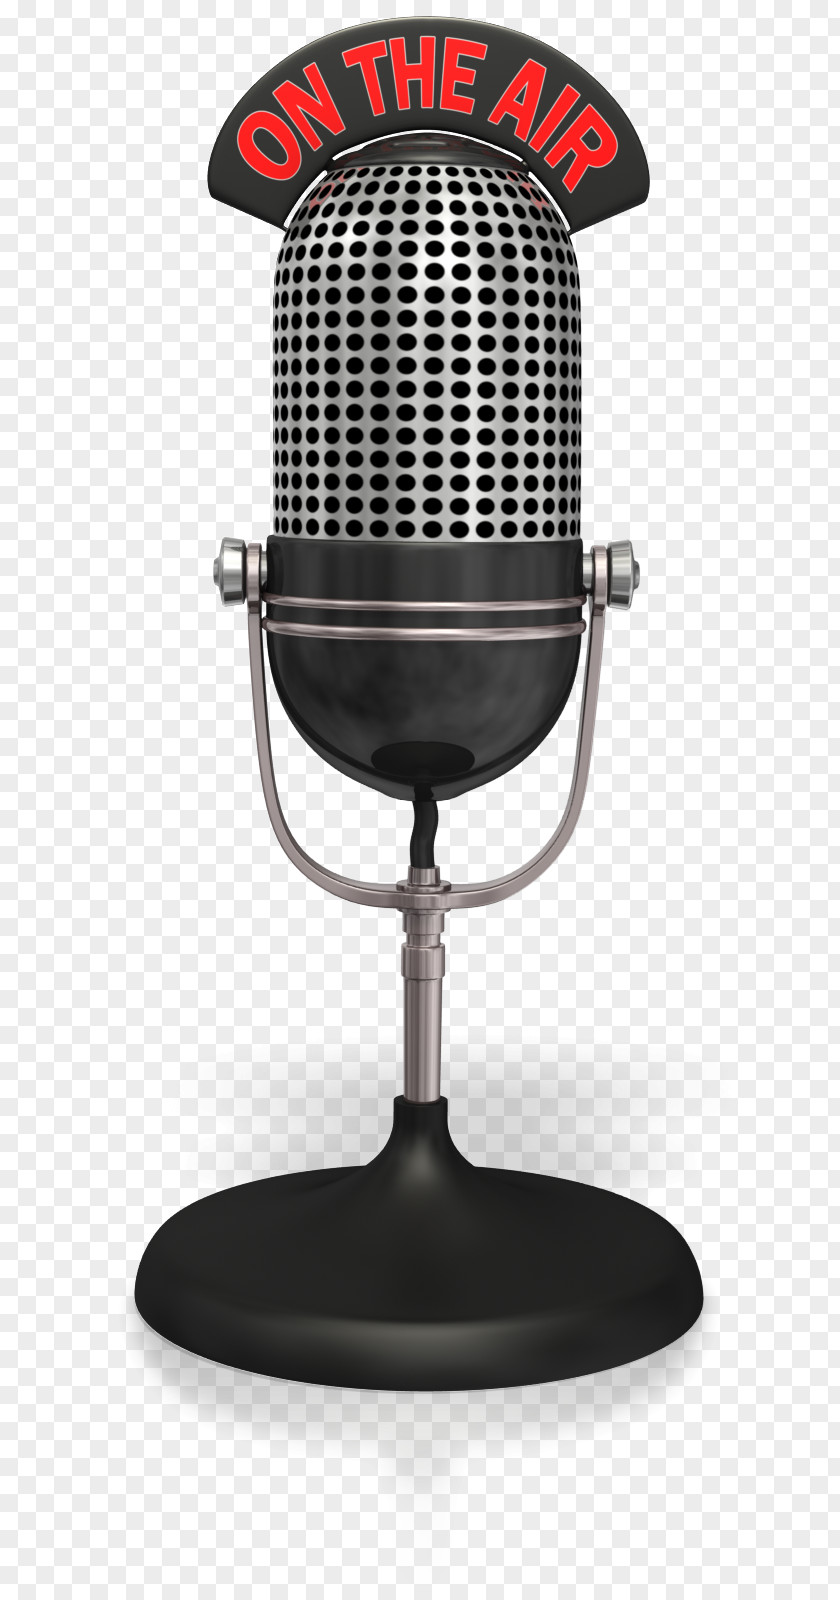 Microphone Wireless Golden Age Of Radio Clip Art PNG